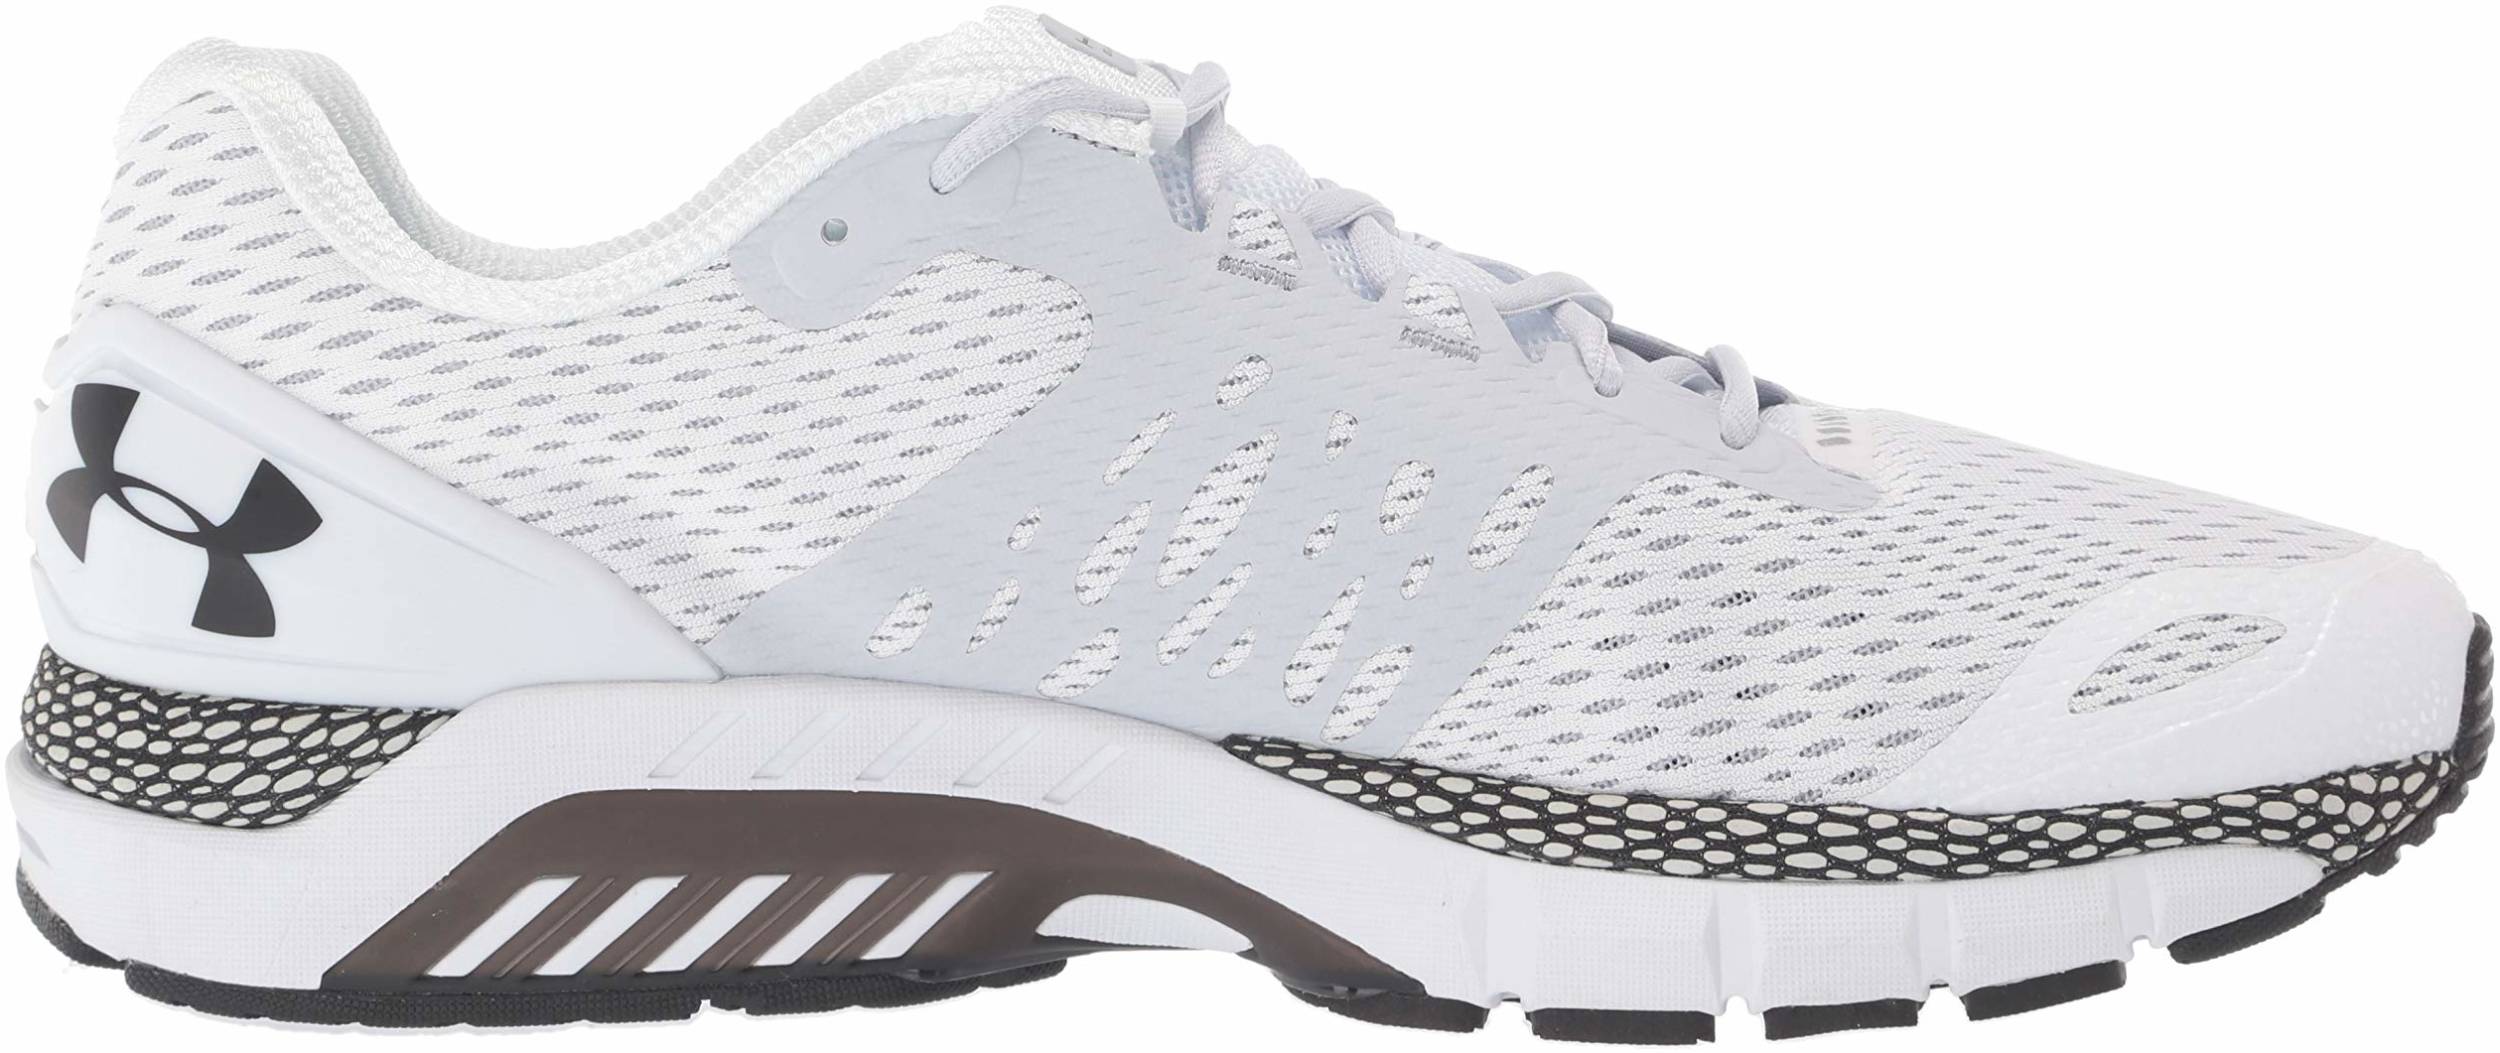 under armour stability running shoes womens